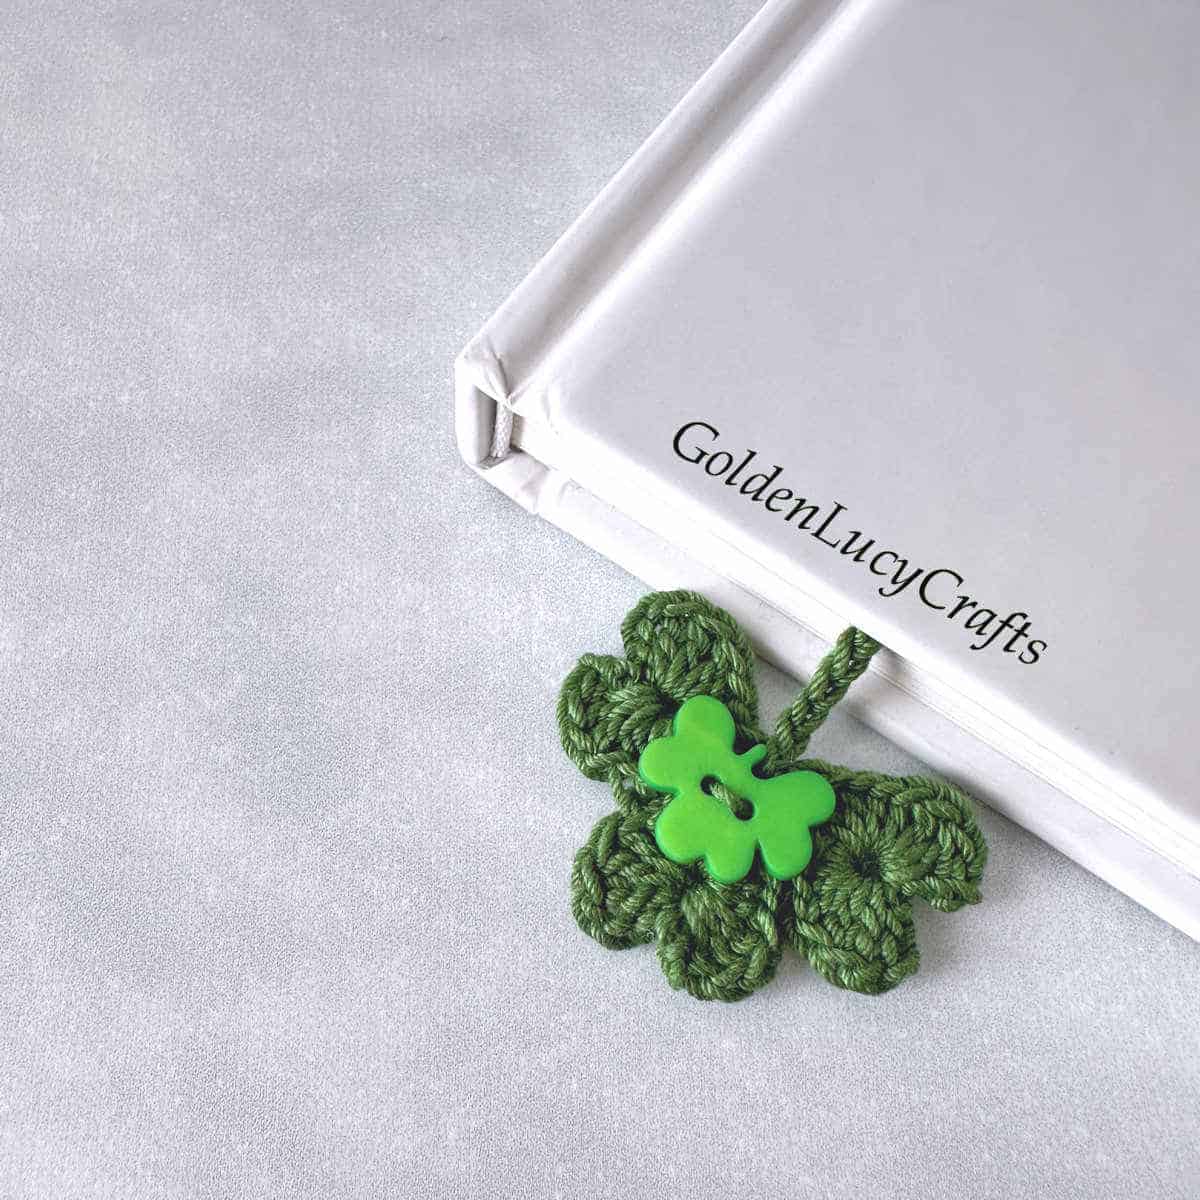 Book with crocheted shamrock bookmark in it.